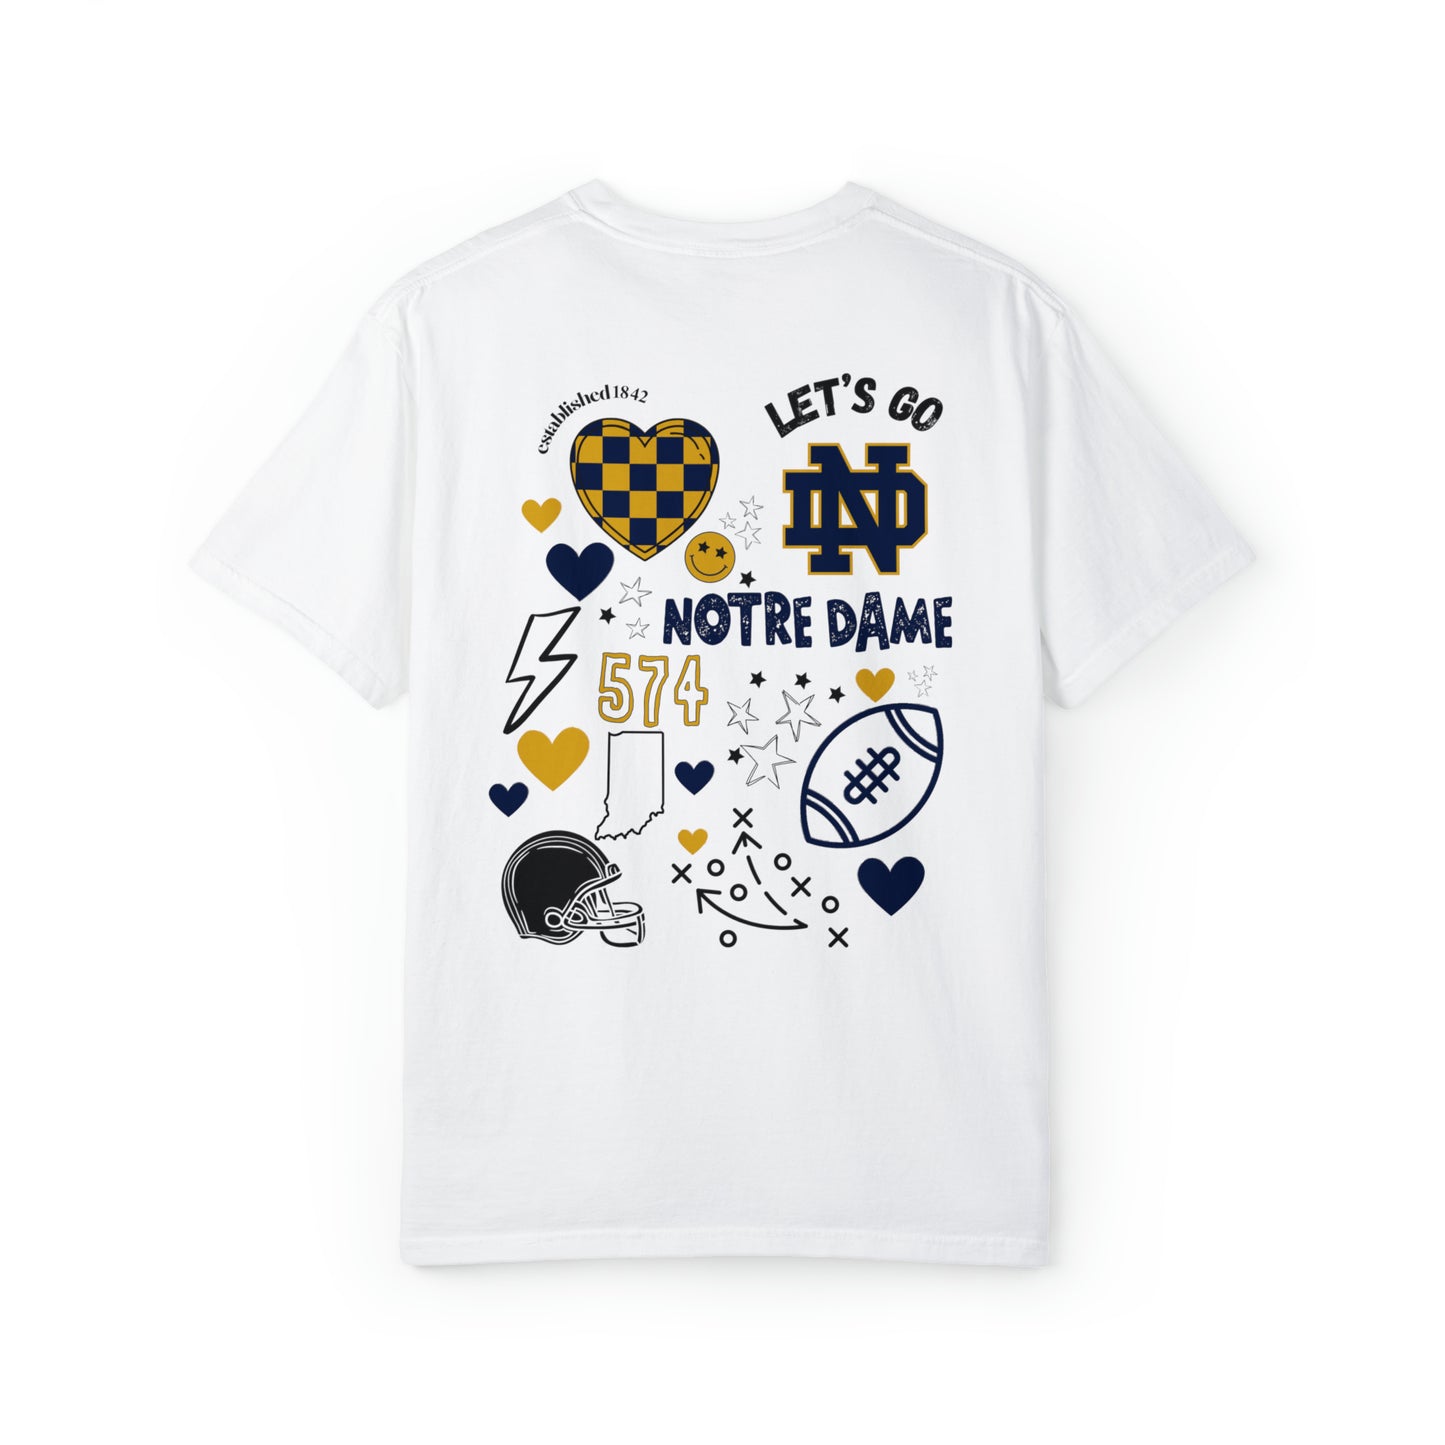 Notre Dame Game Day Shirt